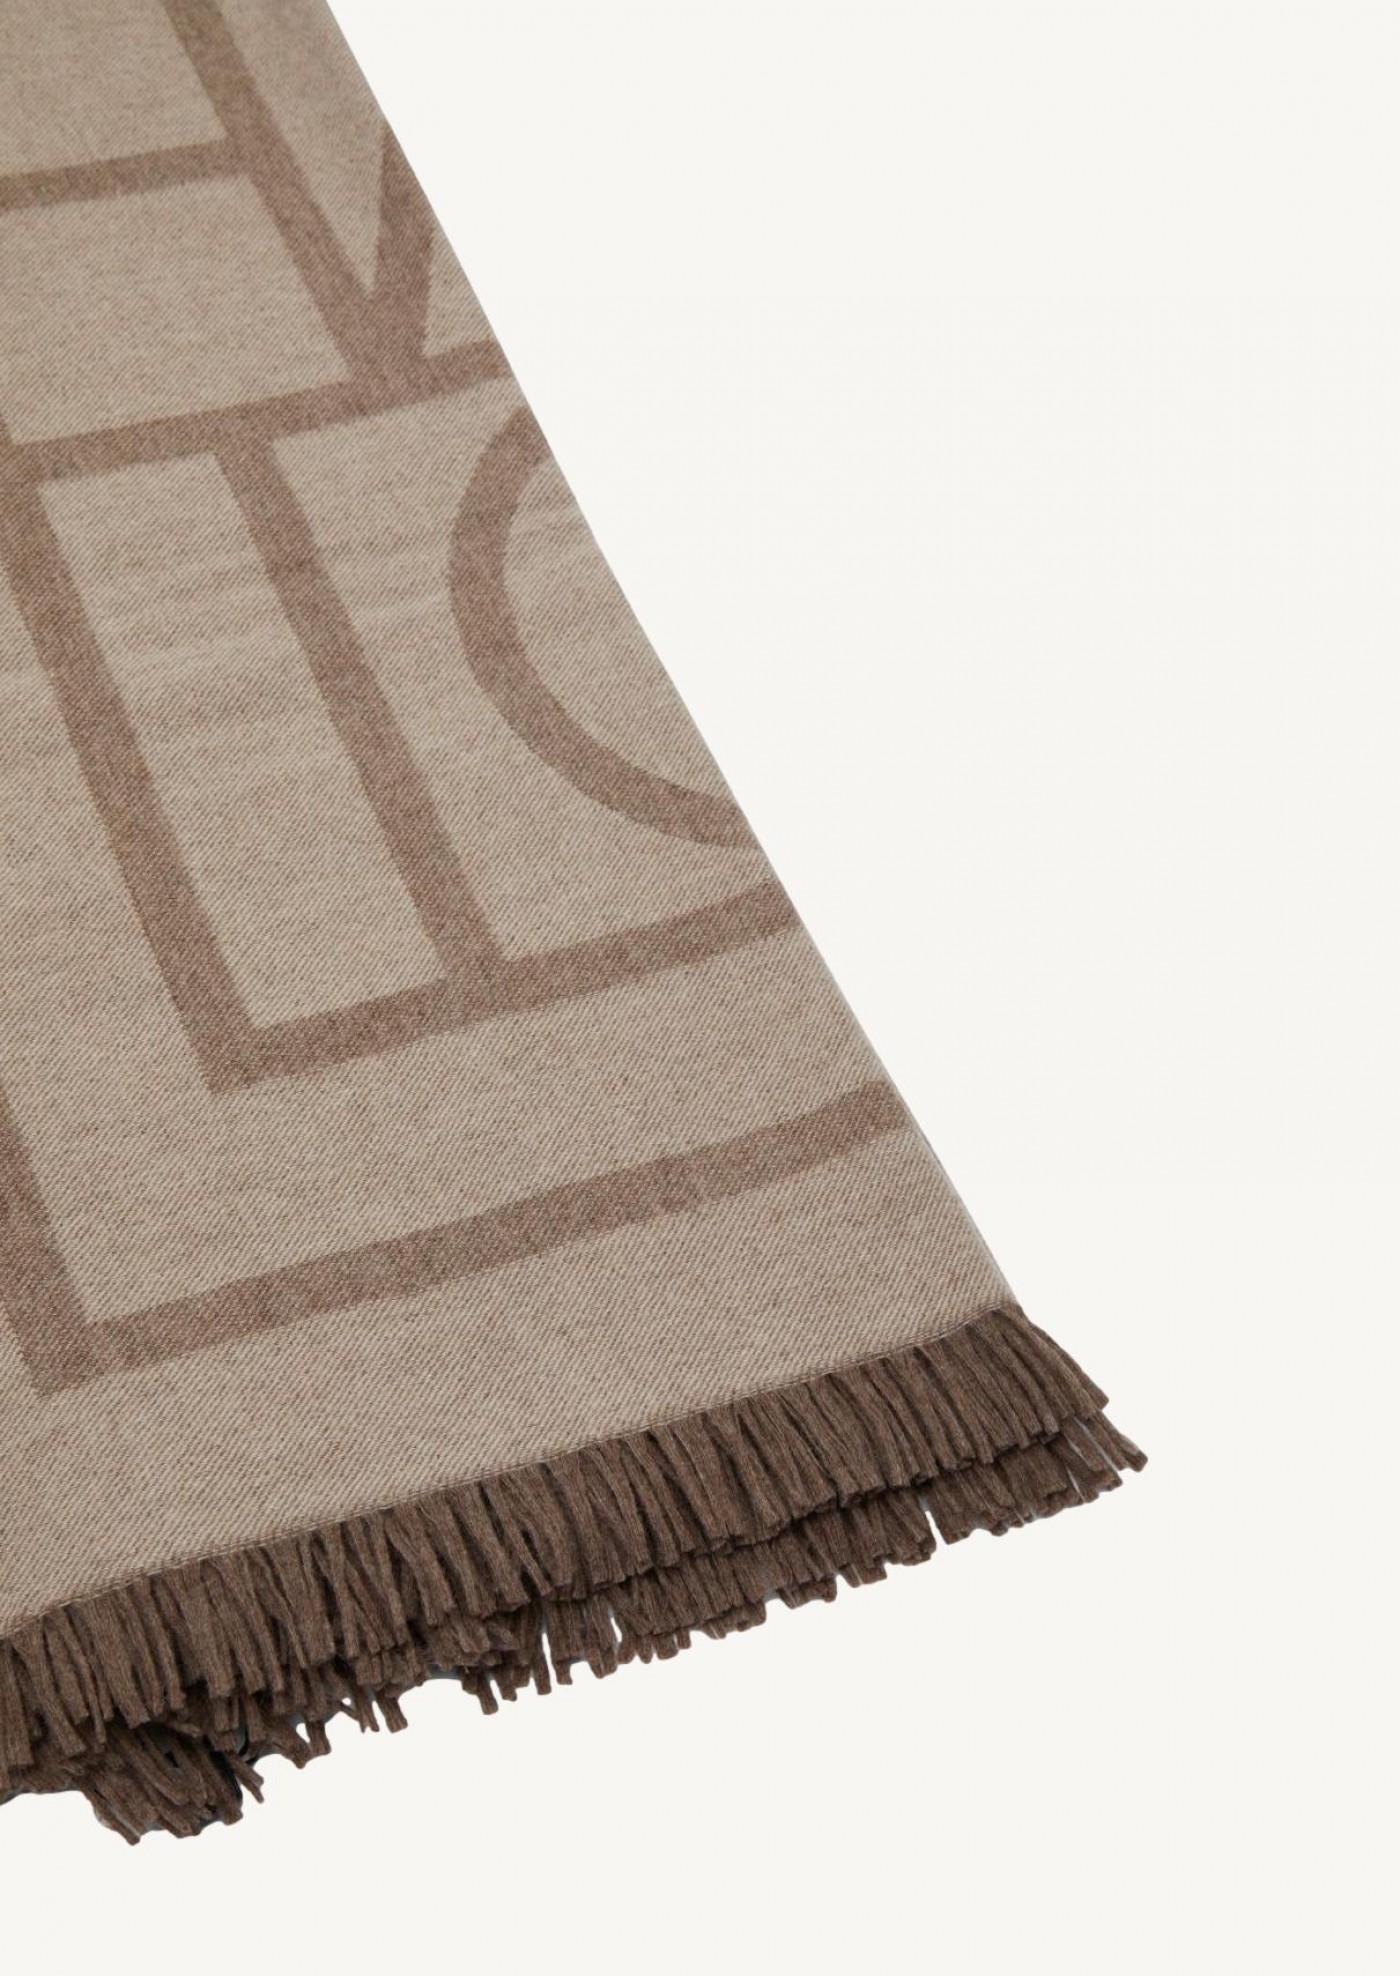 Monogrammed wool and cashmere scarf